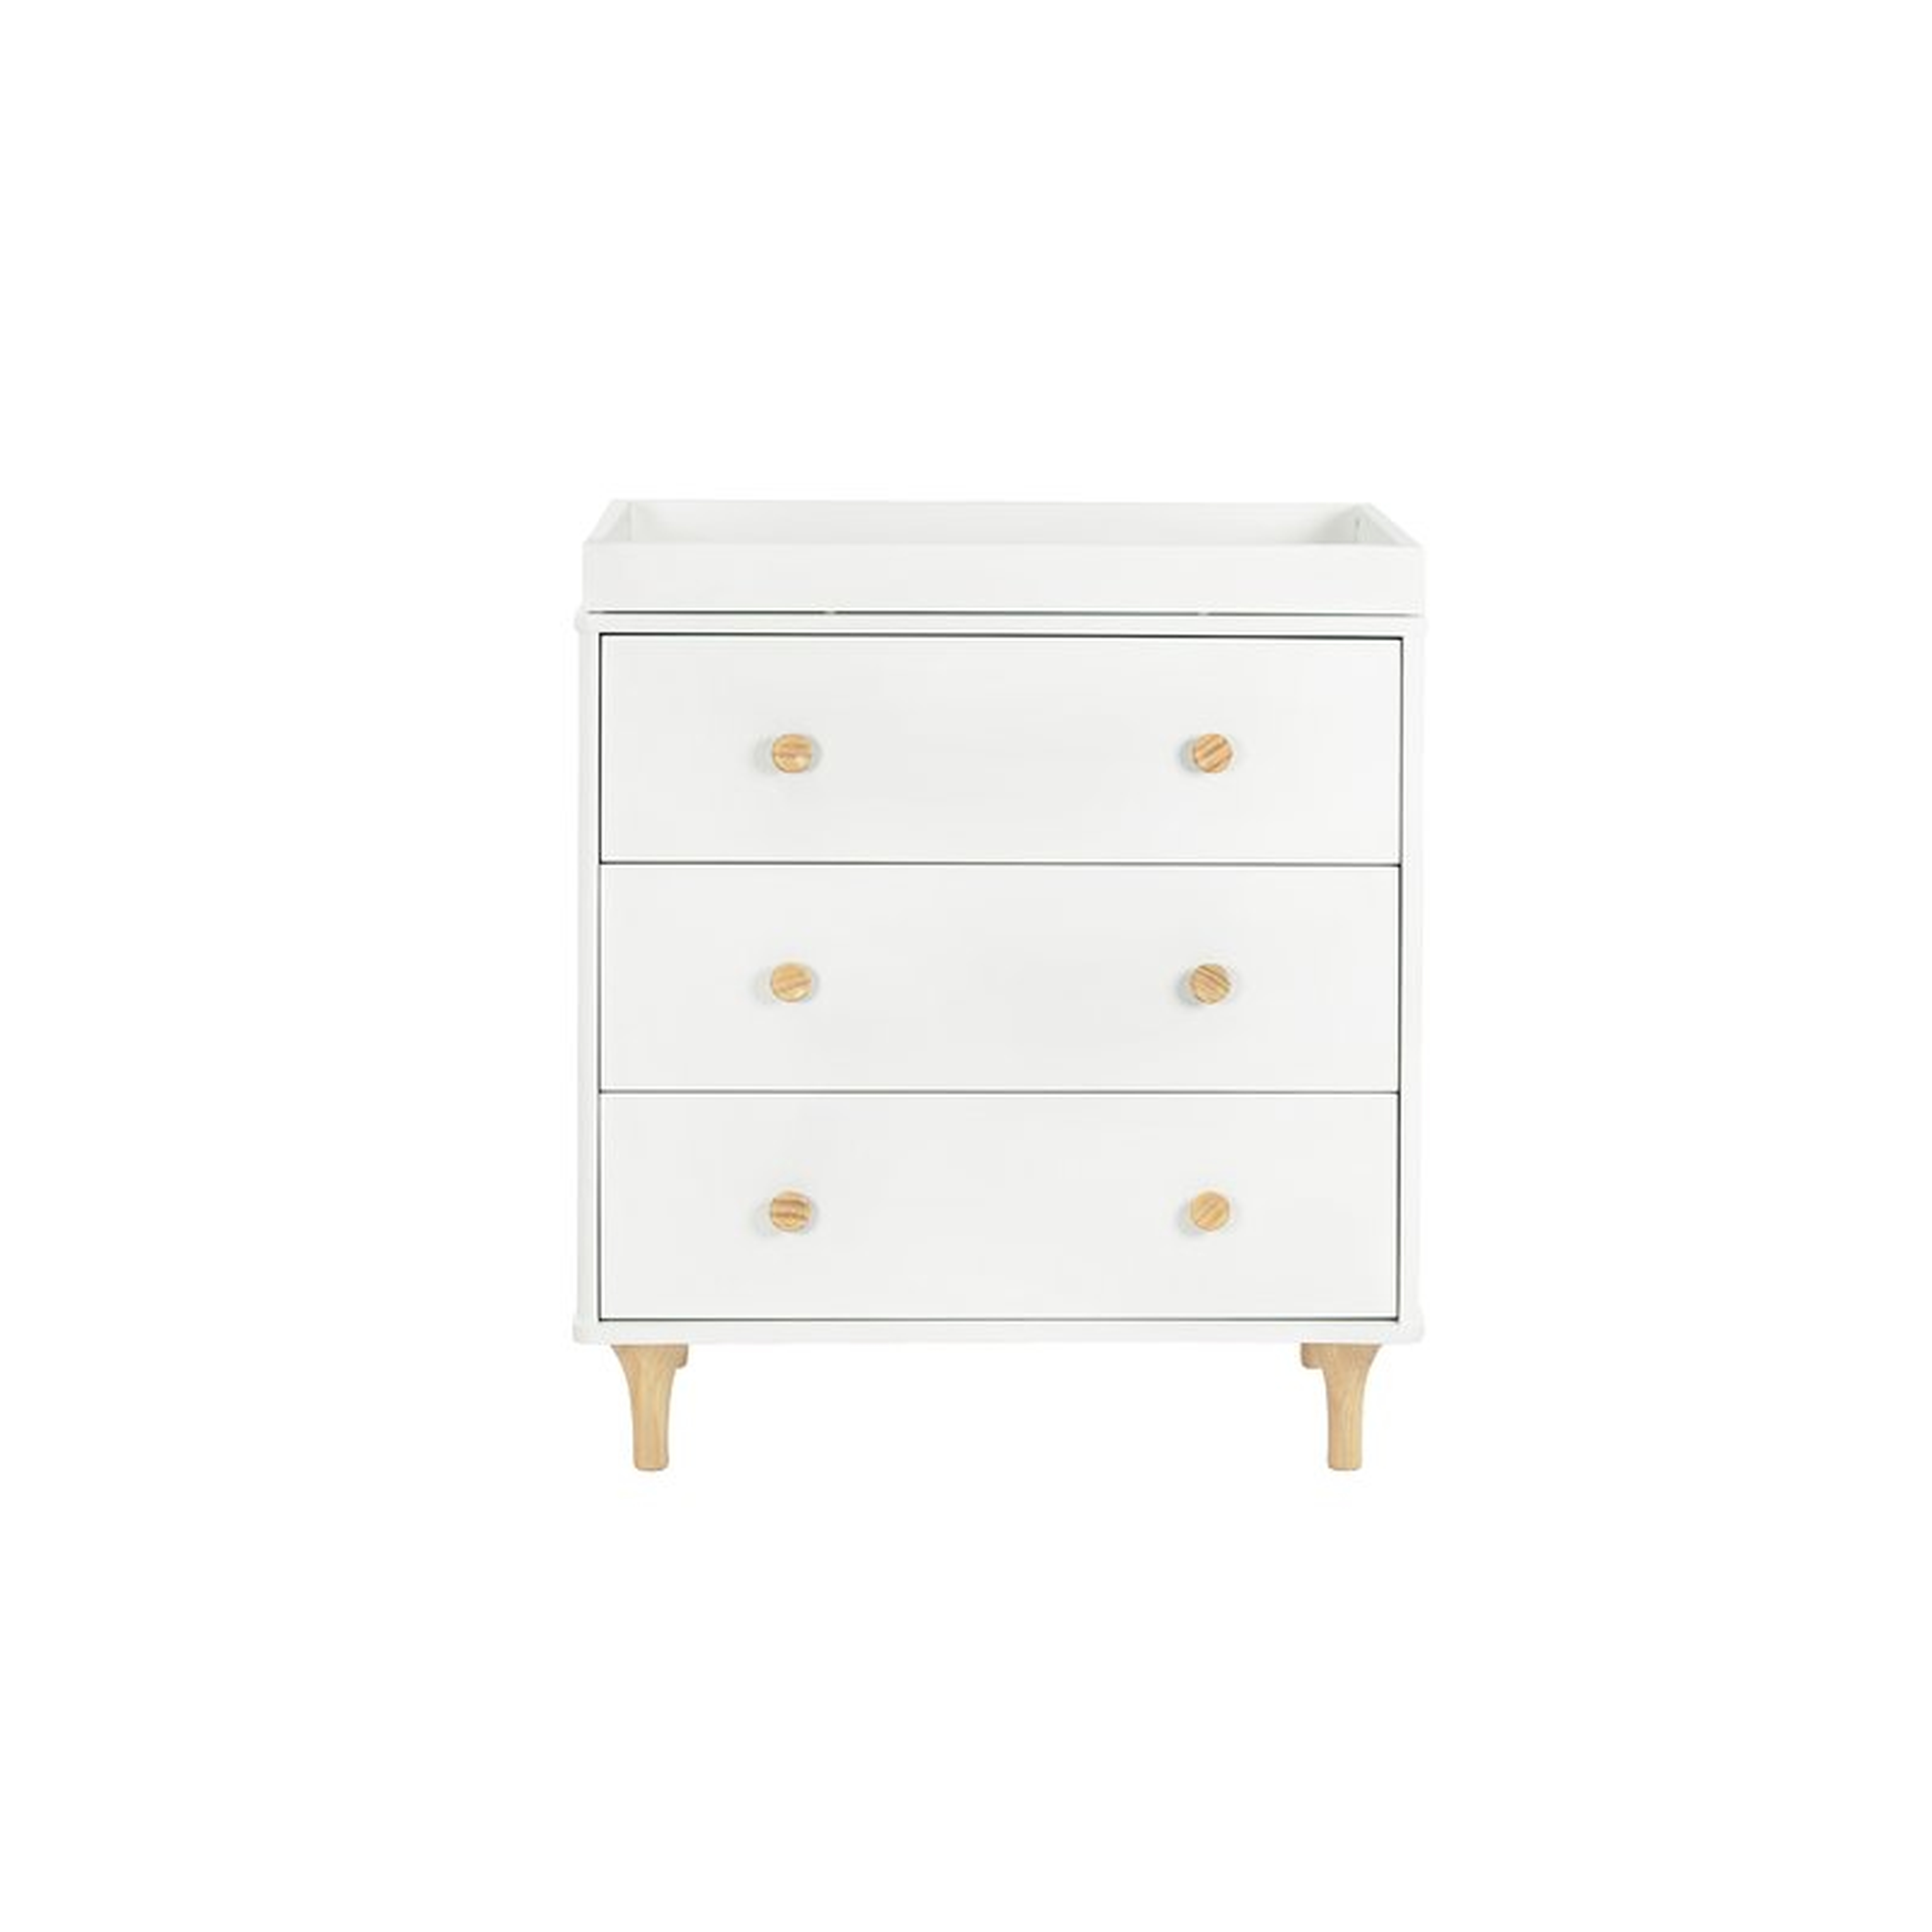 Lolly Changing Table Dresser - Wayfair